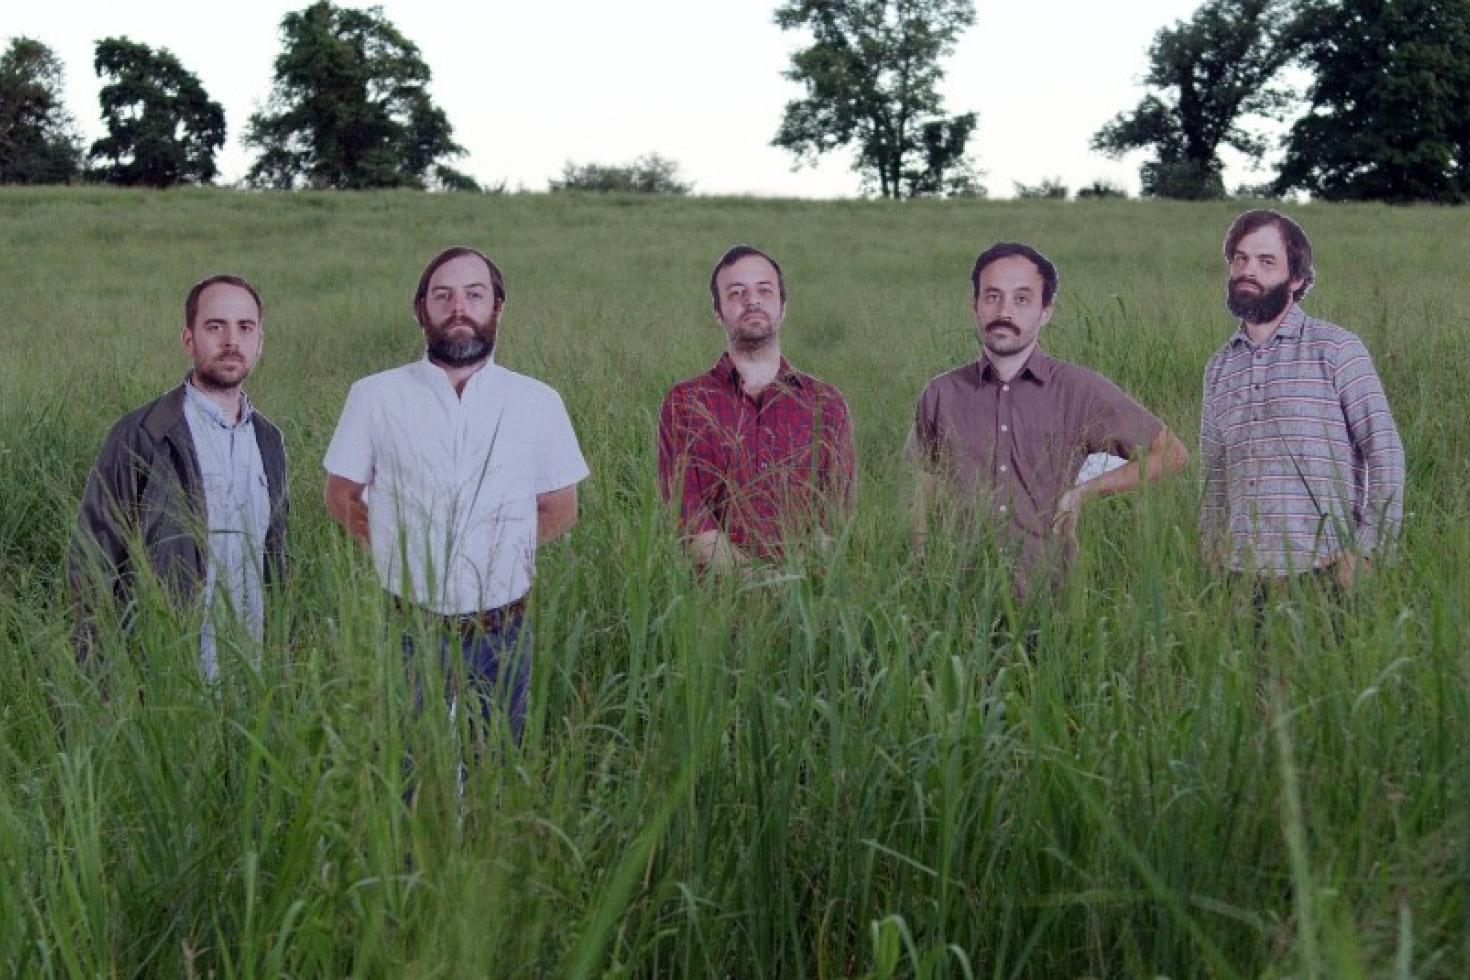 mewithoutYou share album early via Bandcampm